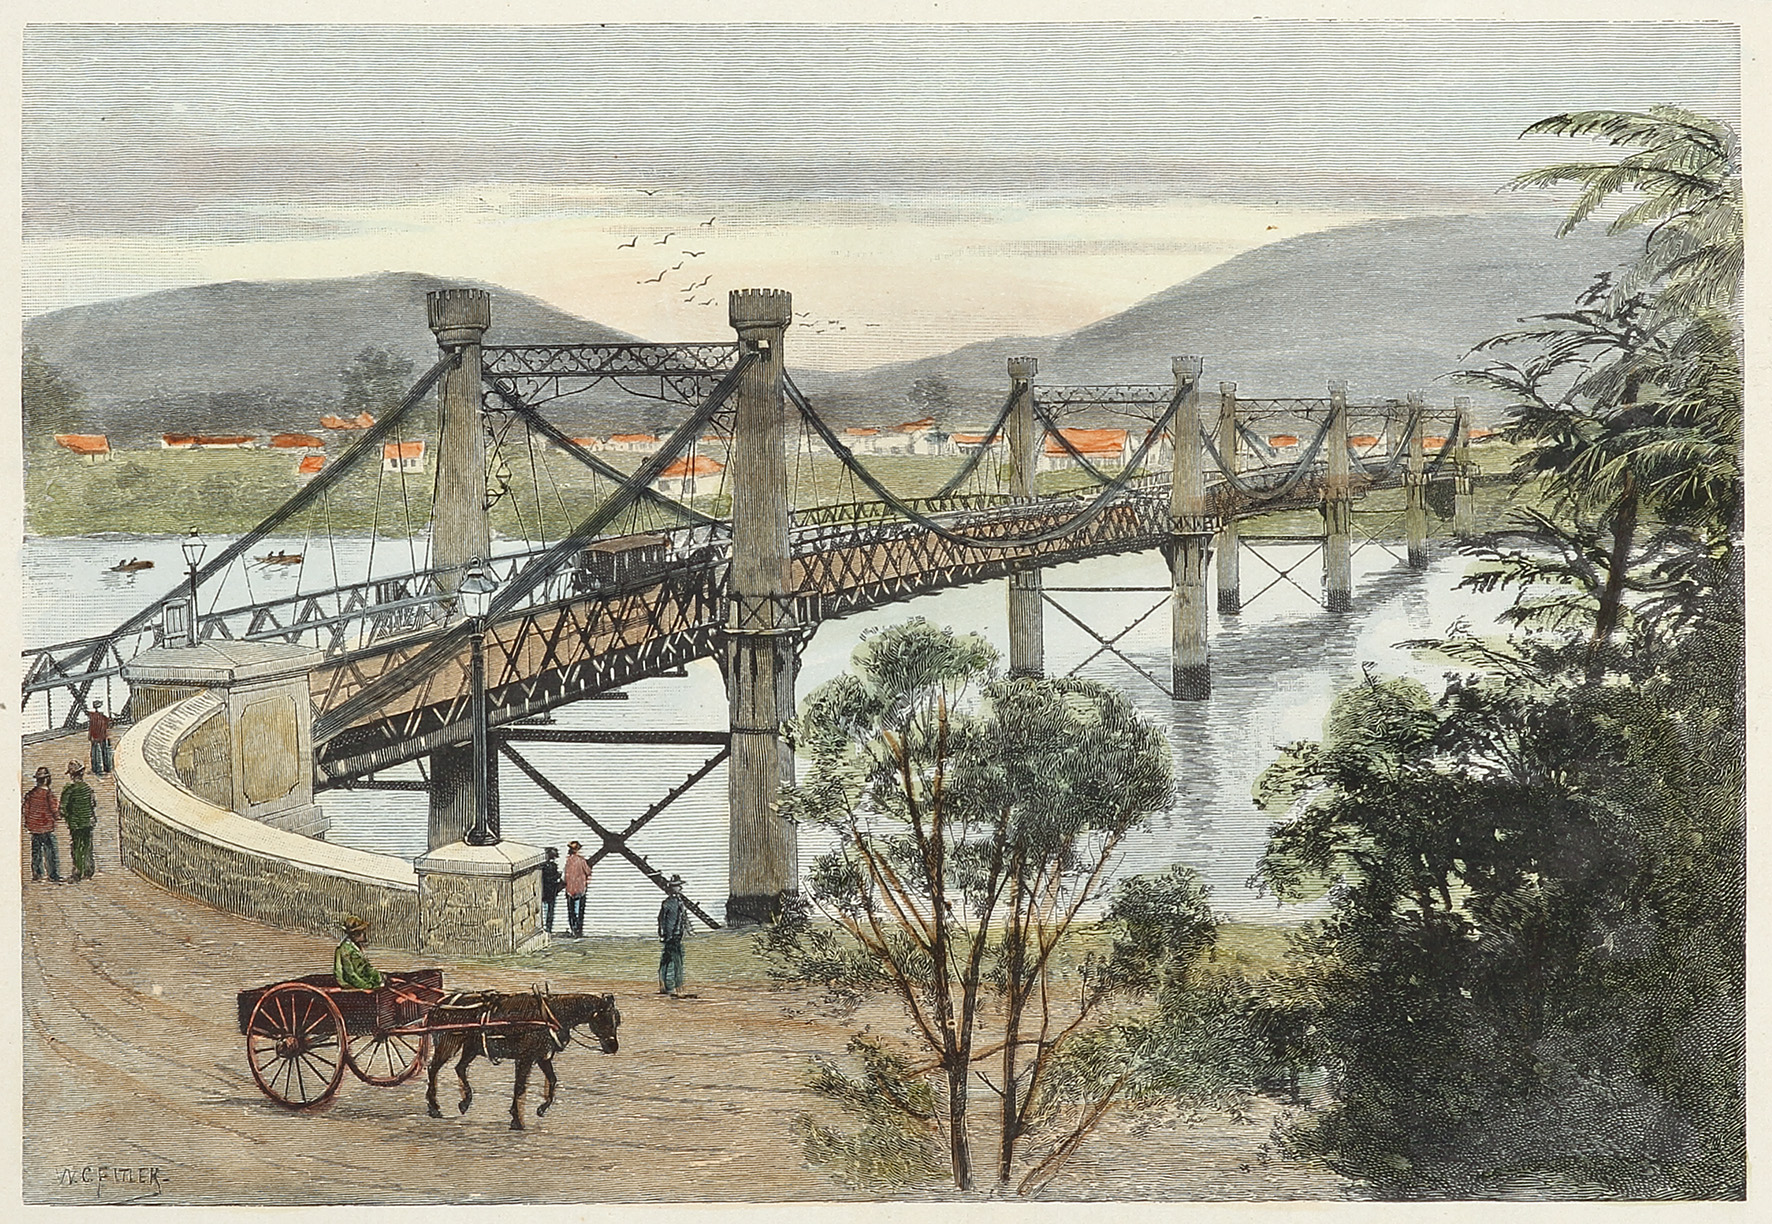 The Bridge over the Fitzroy River, Rockhampton. - Antique View from 1886